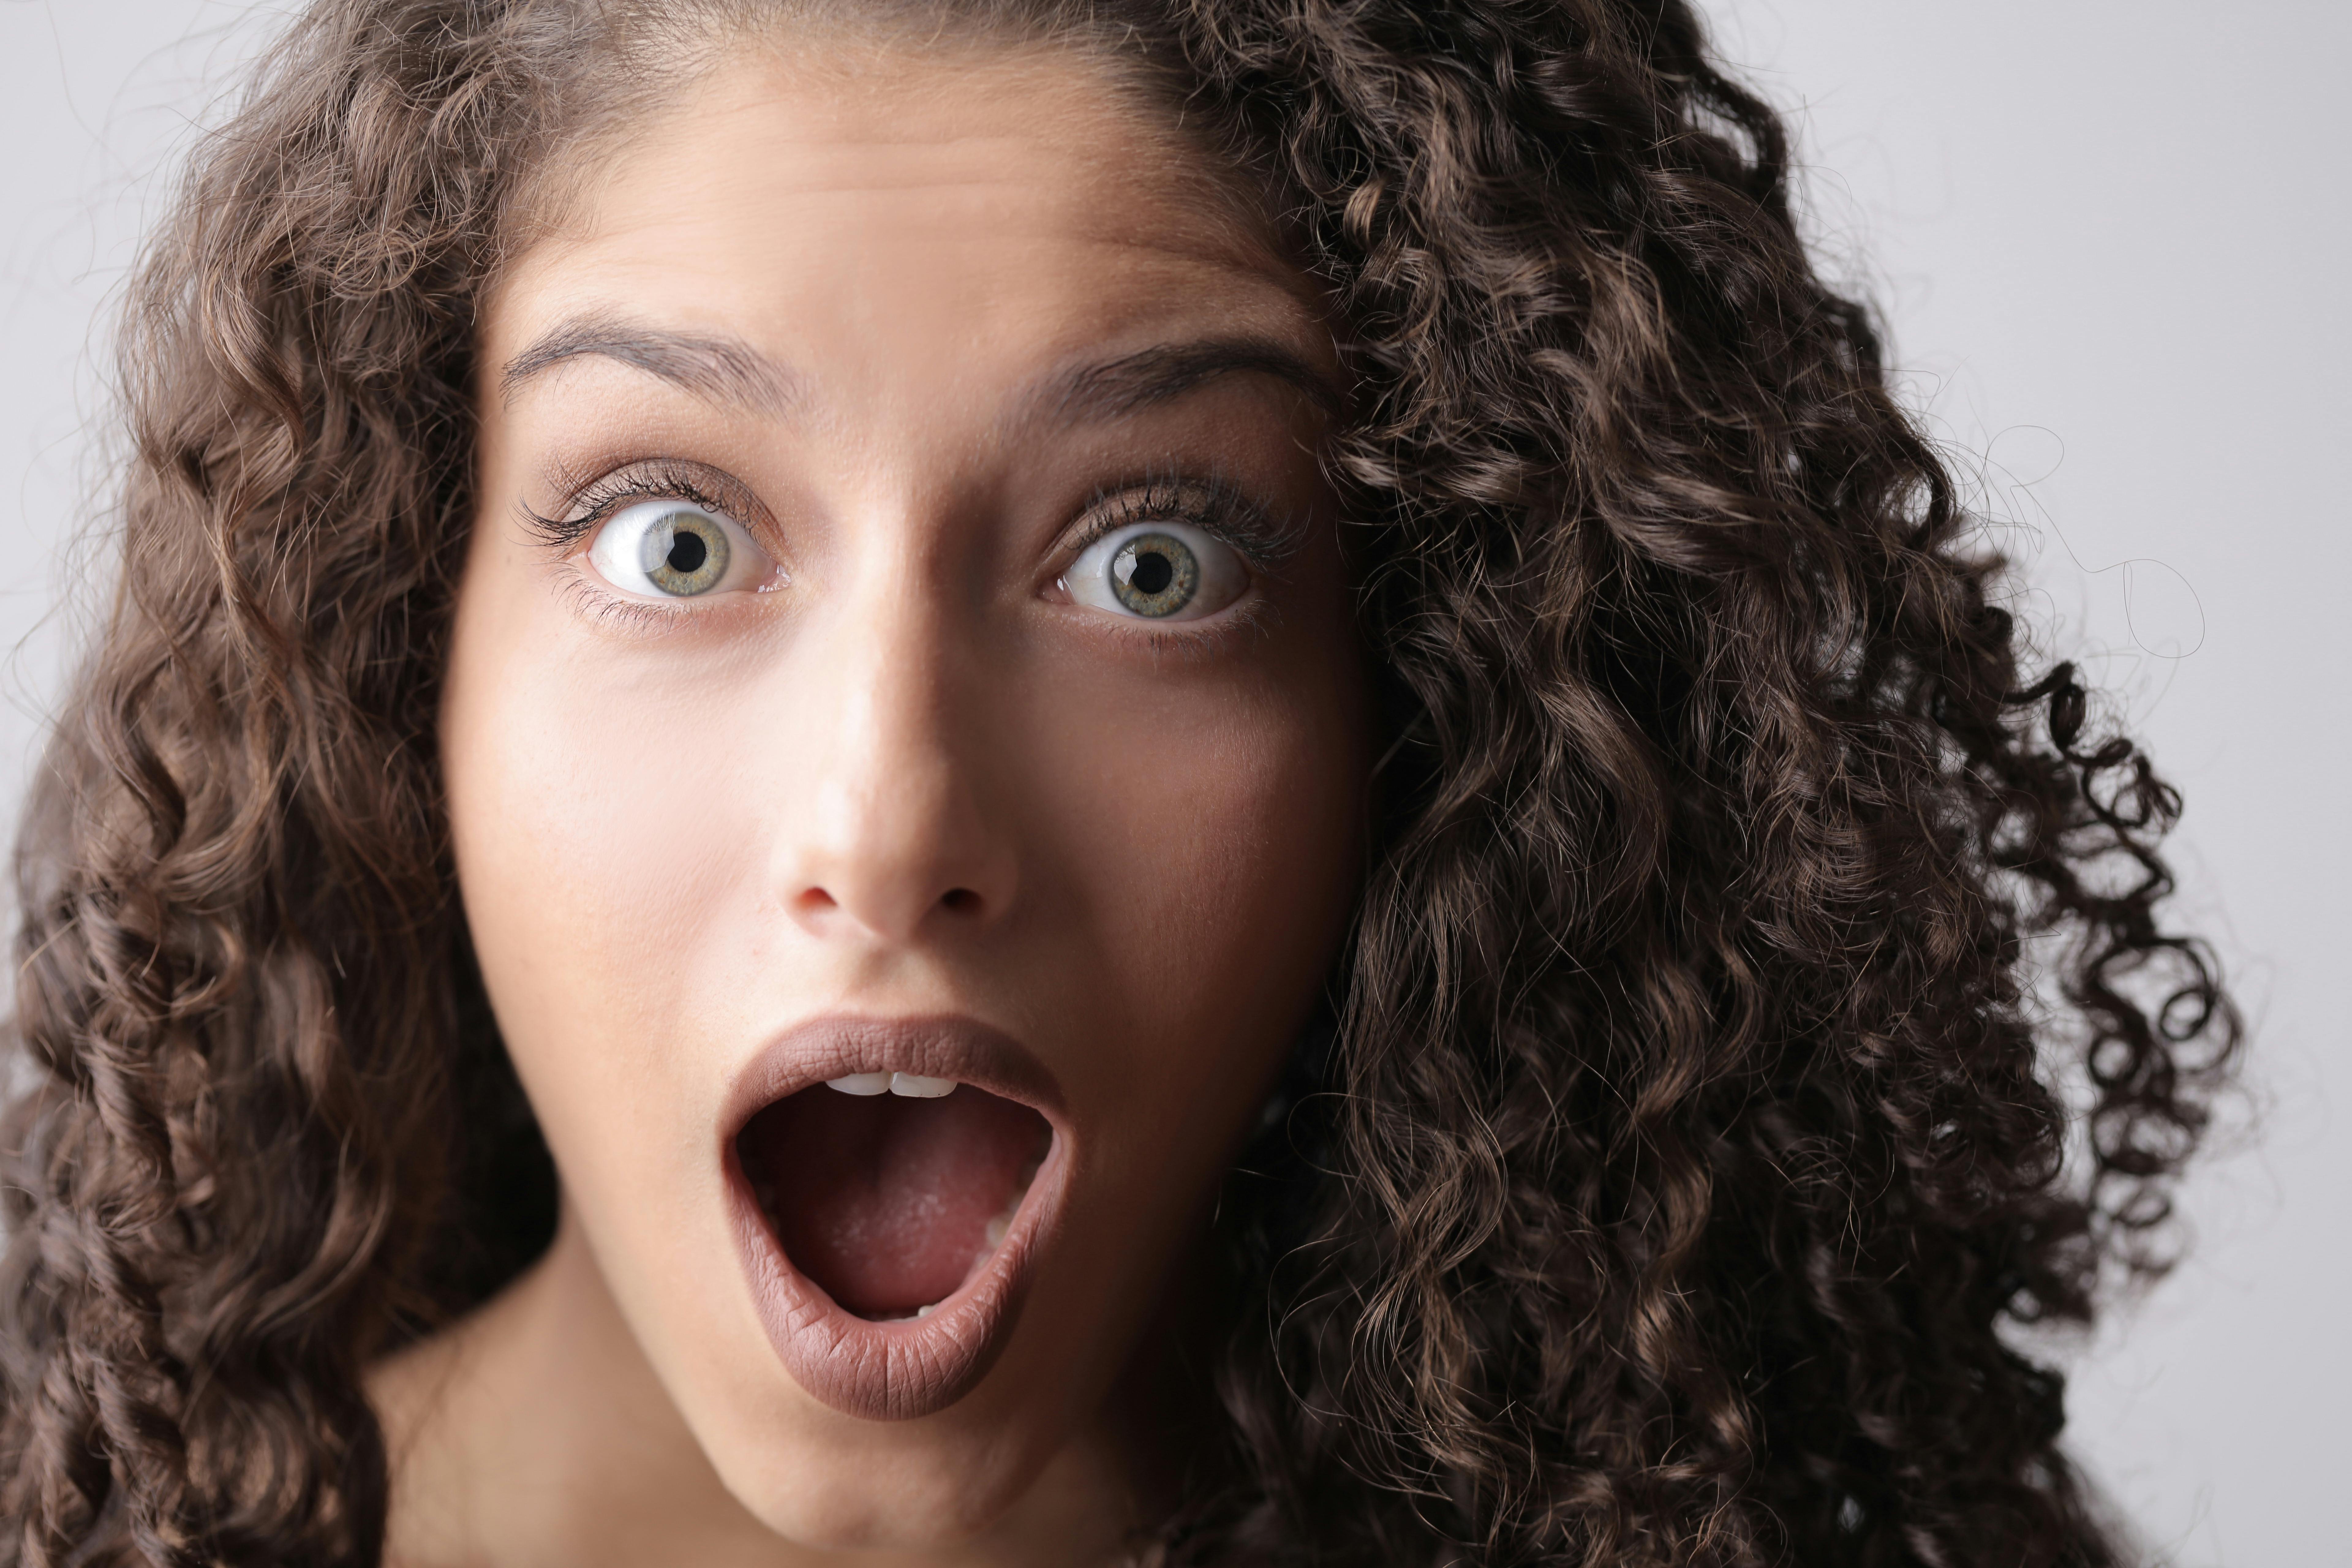 A shocked woman with eyes and mouth wide open | Source: Pexels